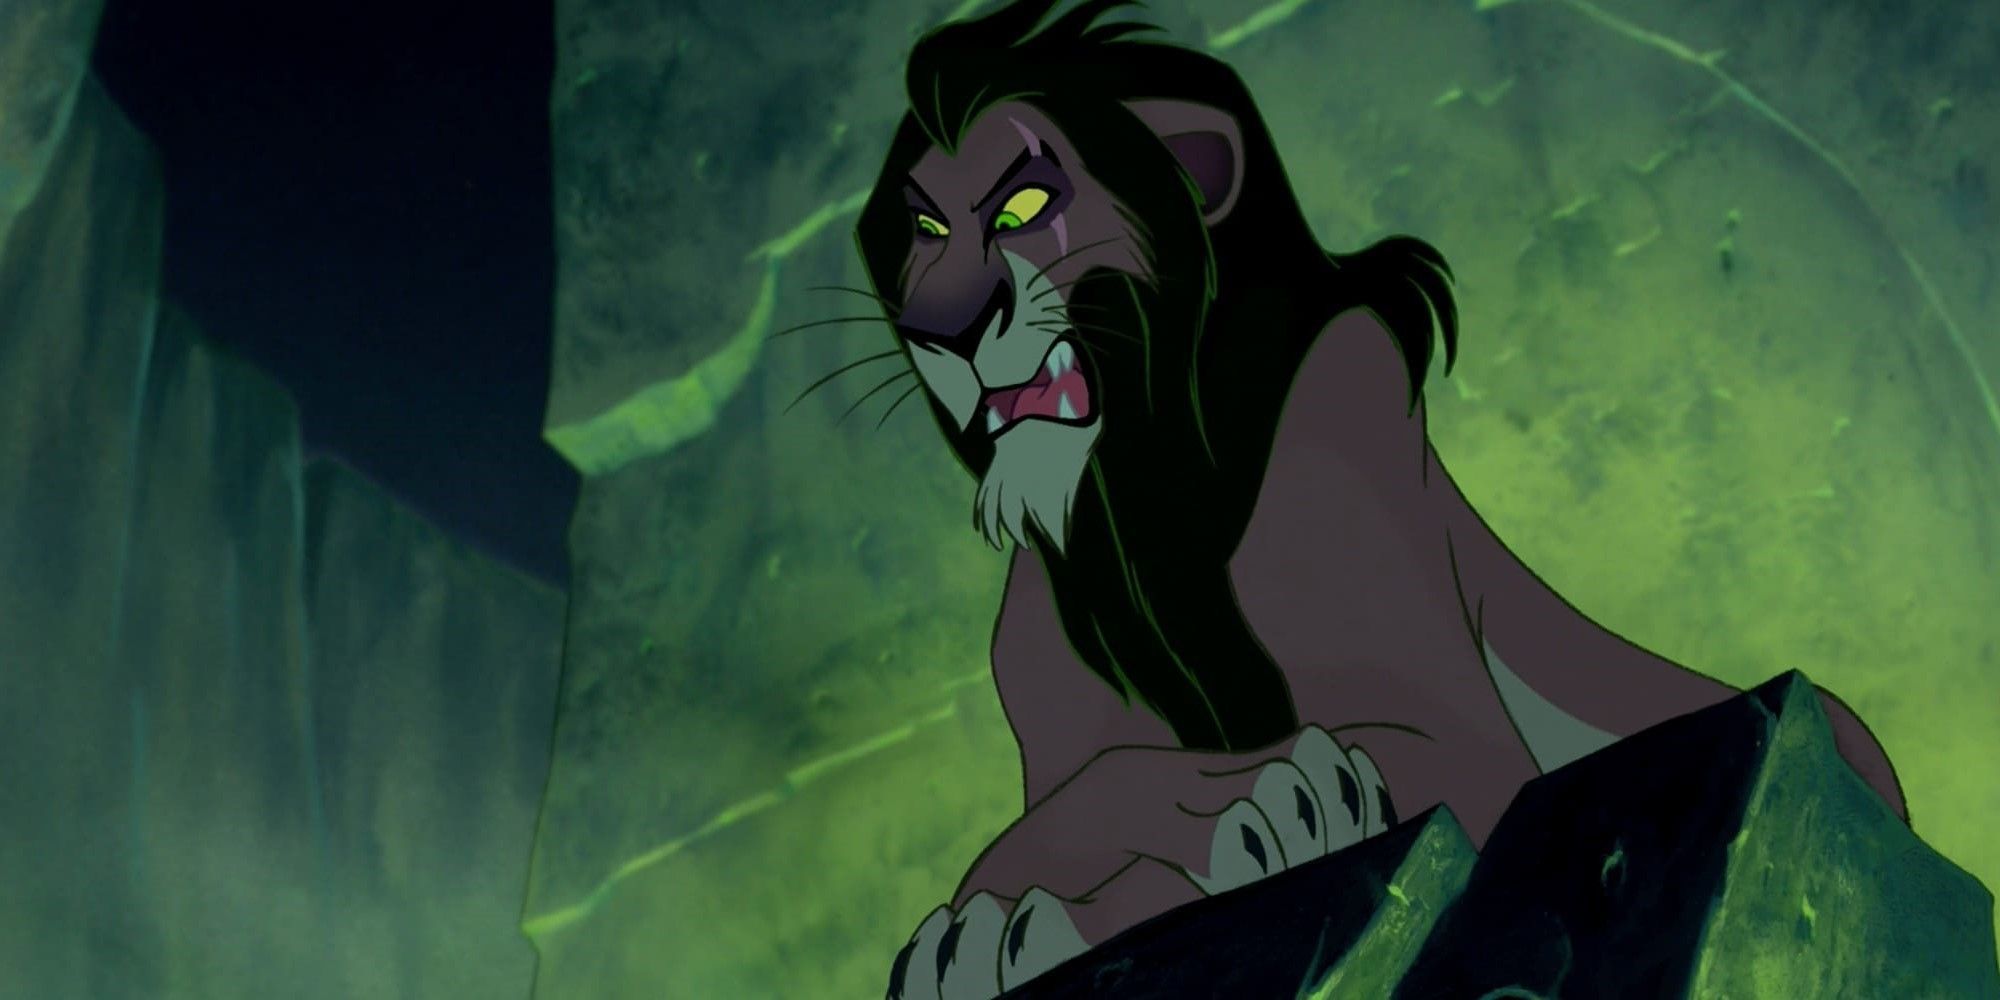 Scar as he appears in The Lion King (1994)